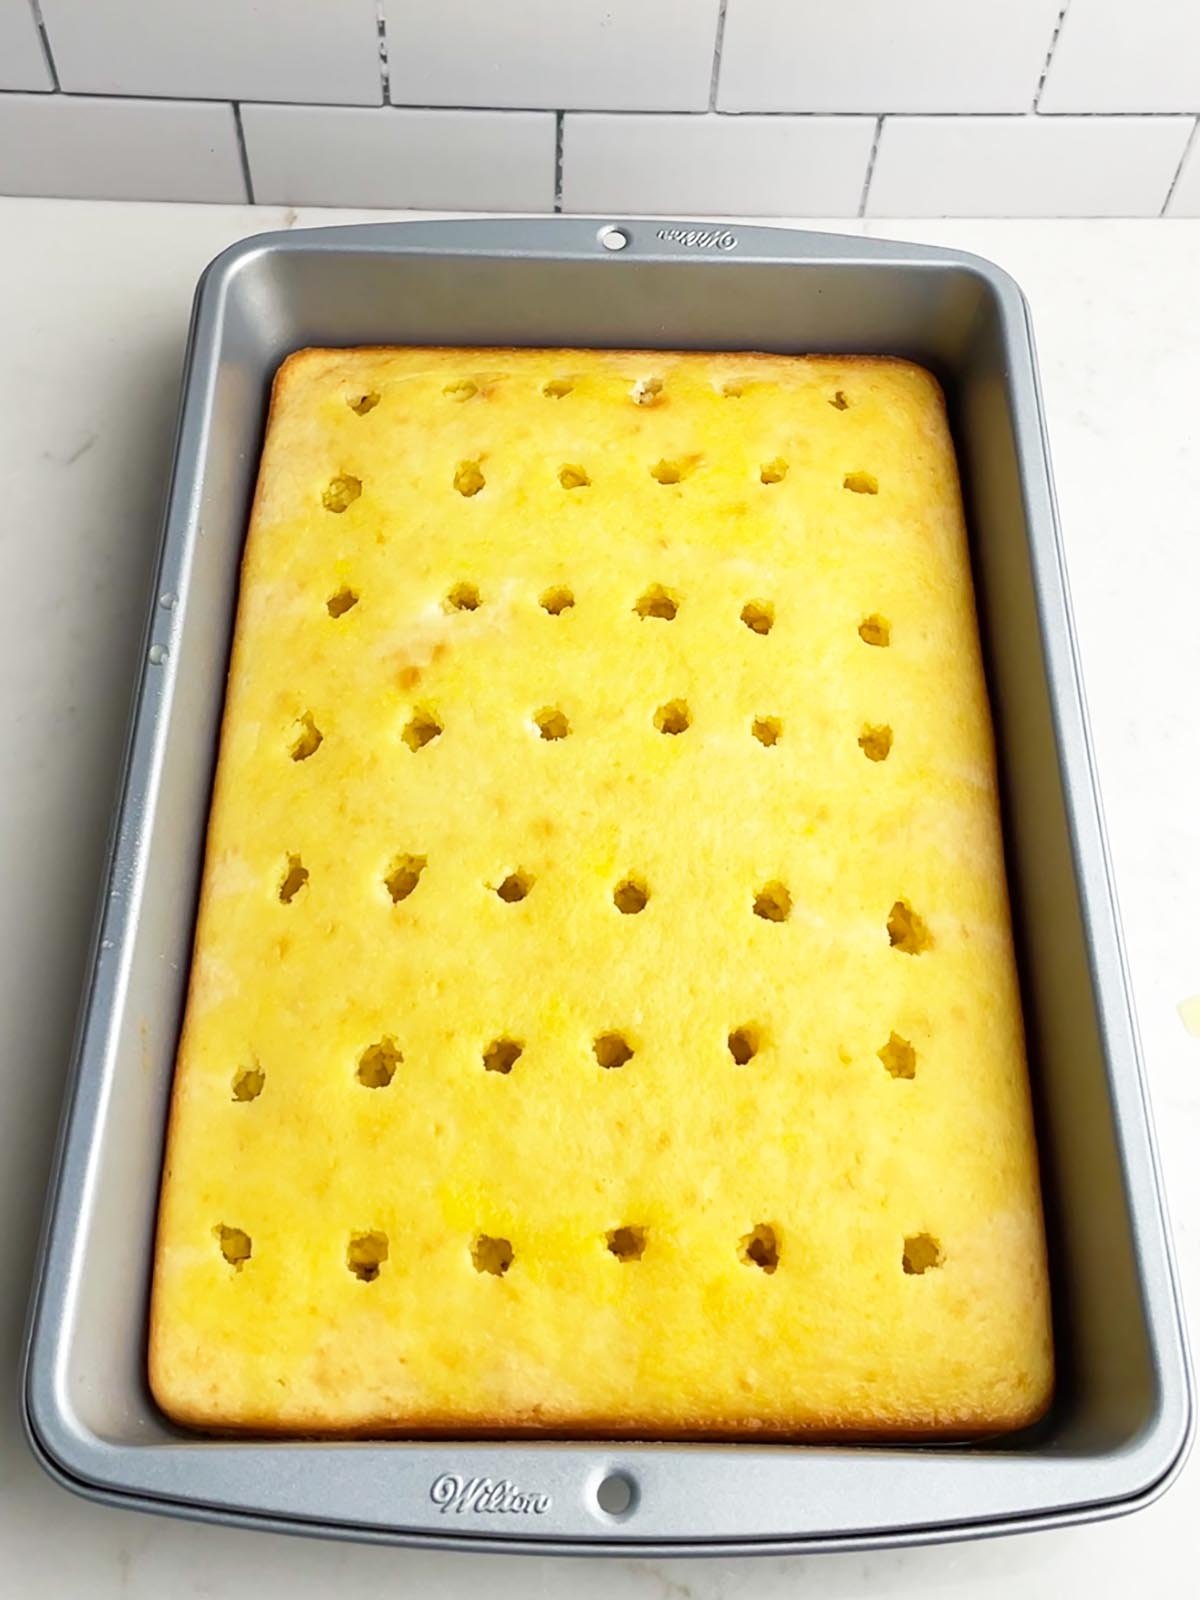 white cake with holes poked on top and lemon jello poured over the top